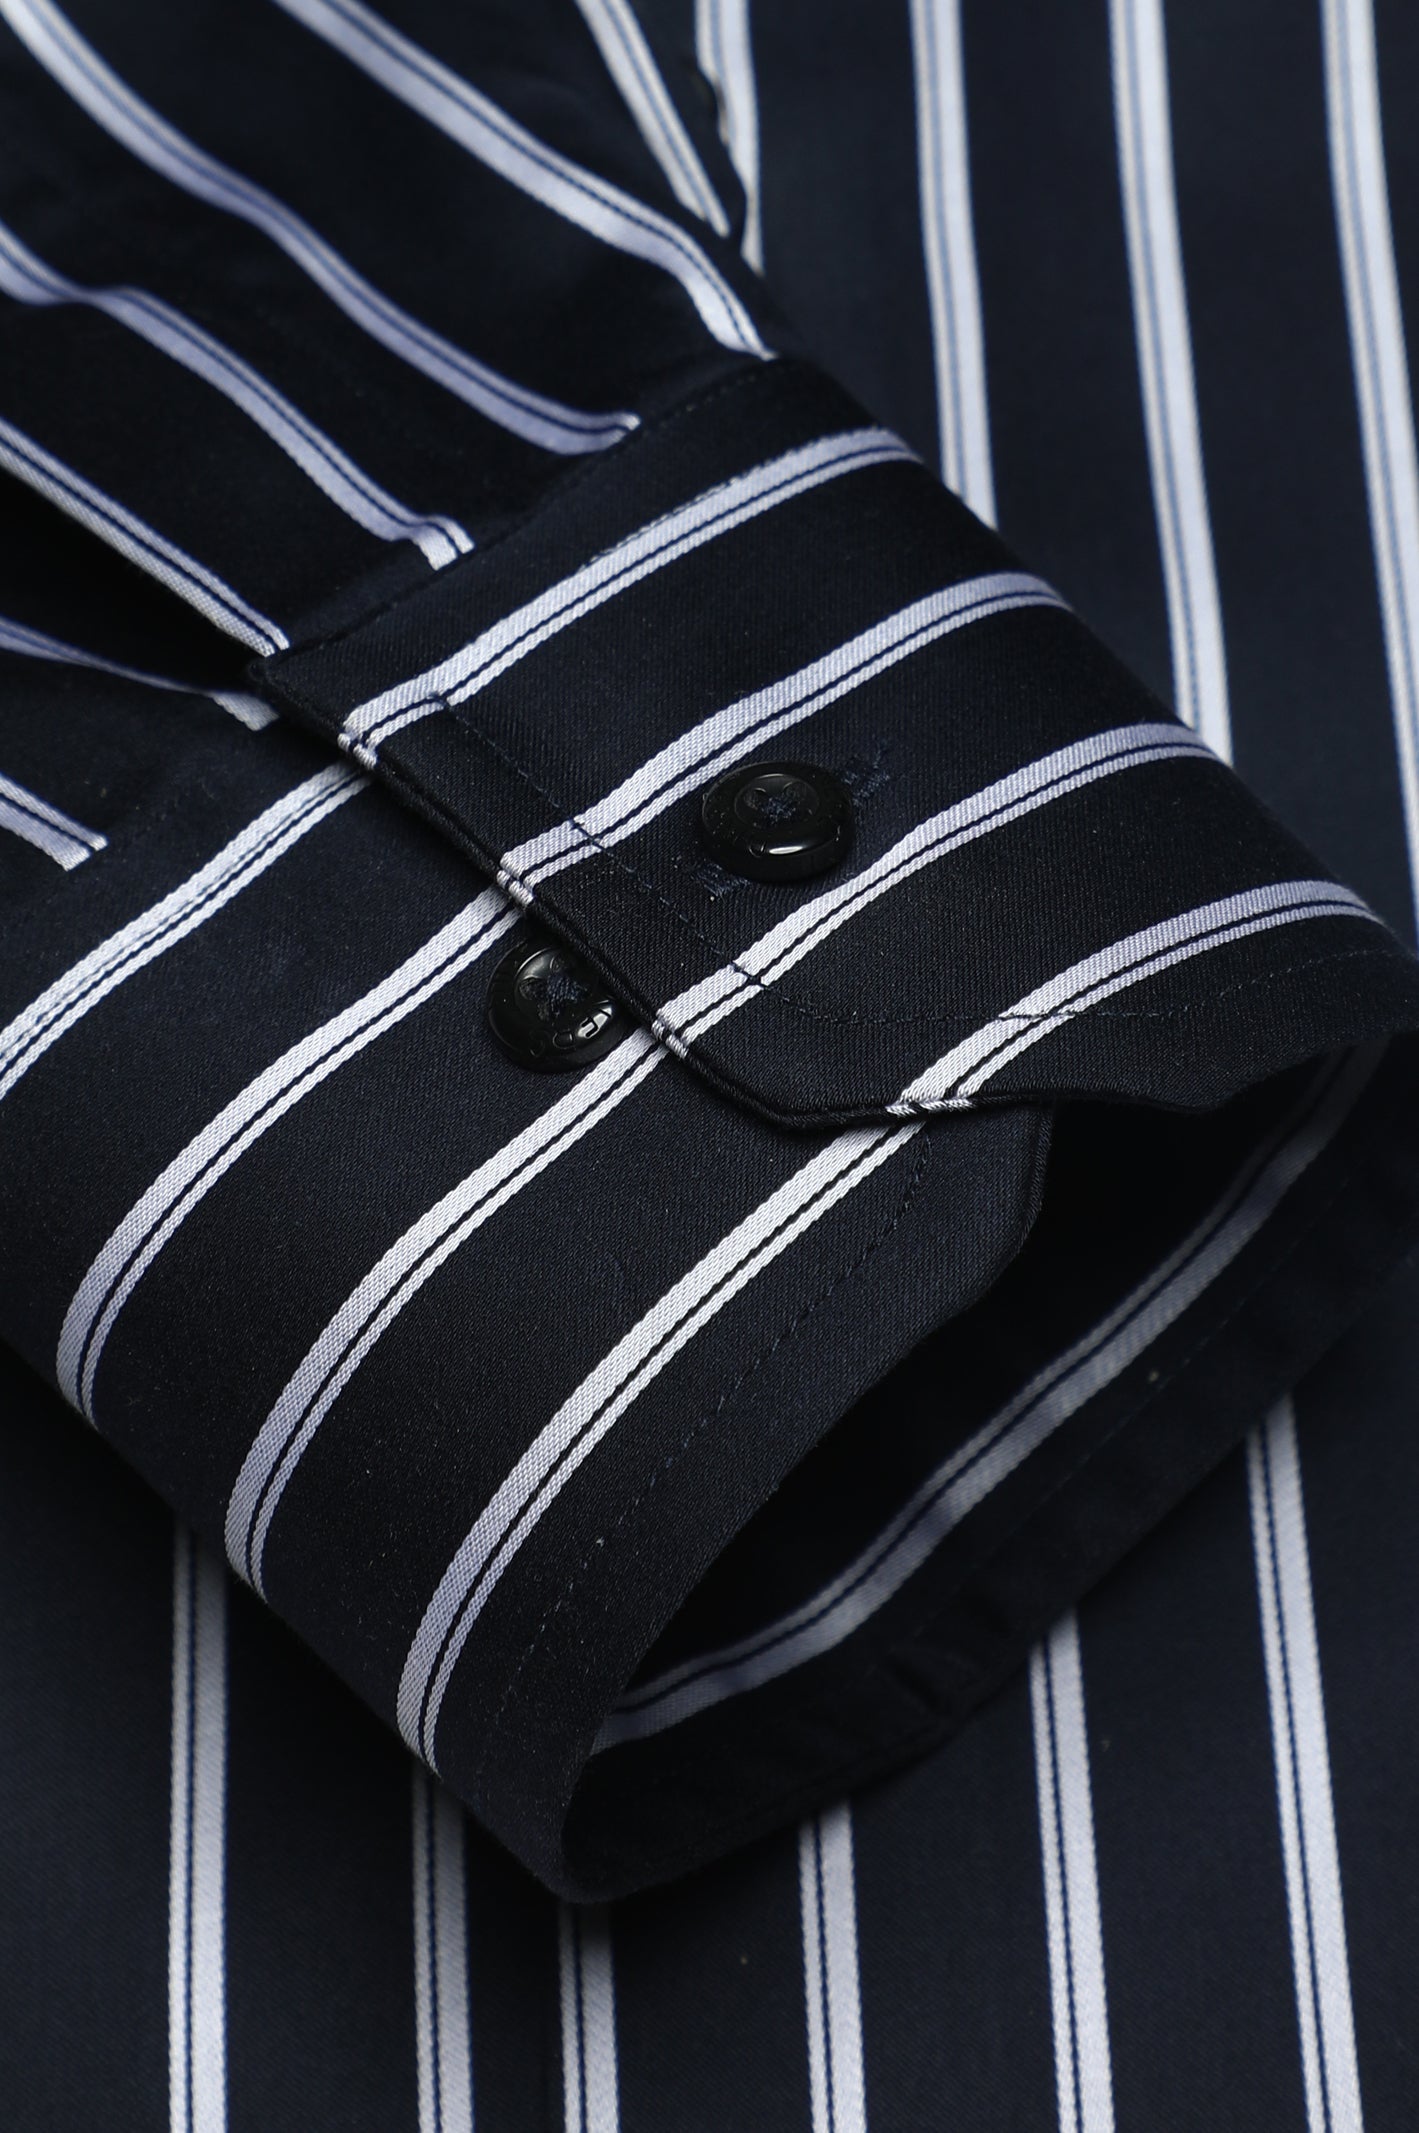 Black Bengal Stripes Casual Milano Shirt for Men - Diners